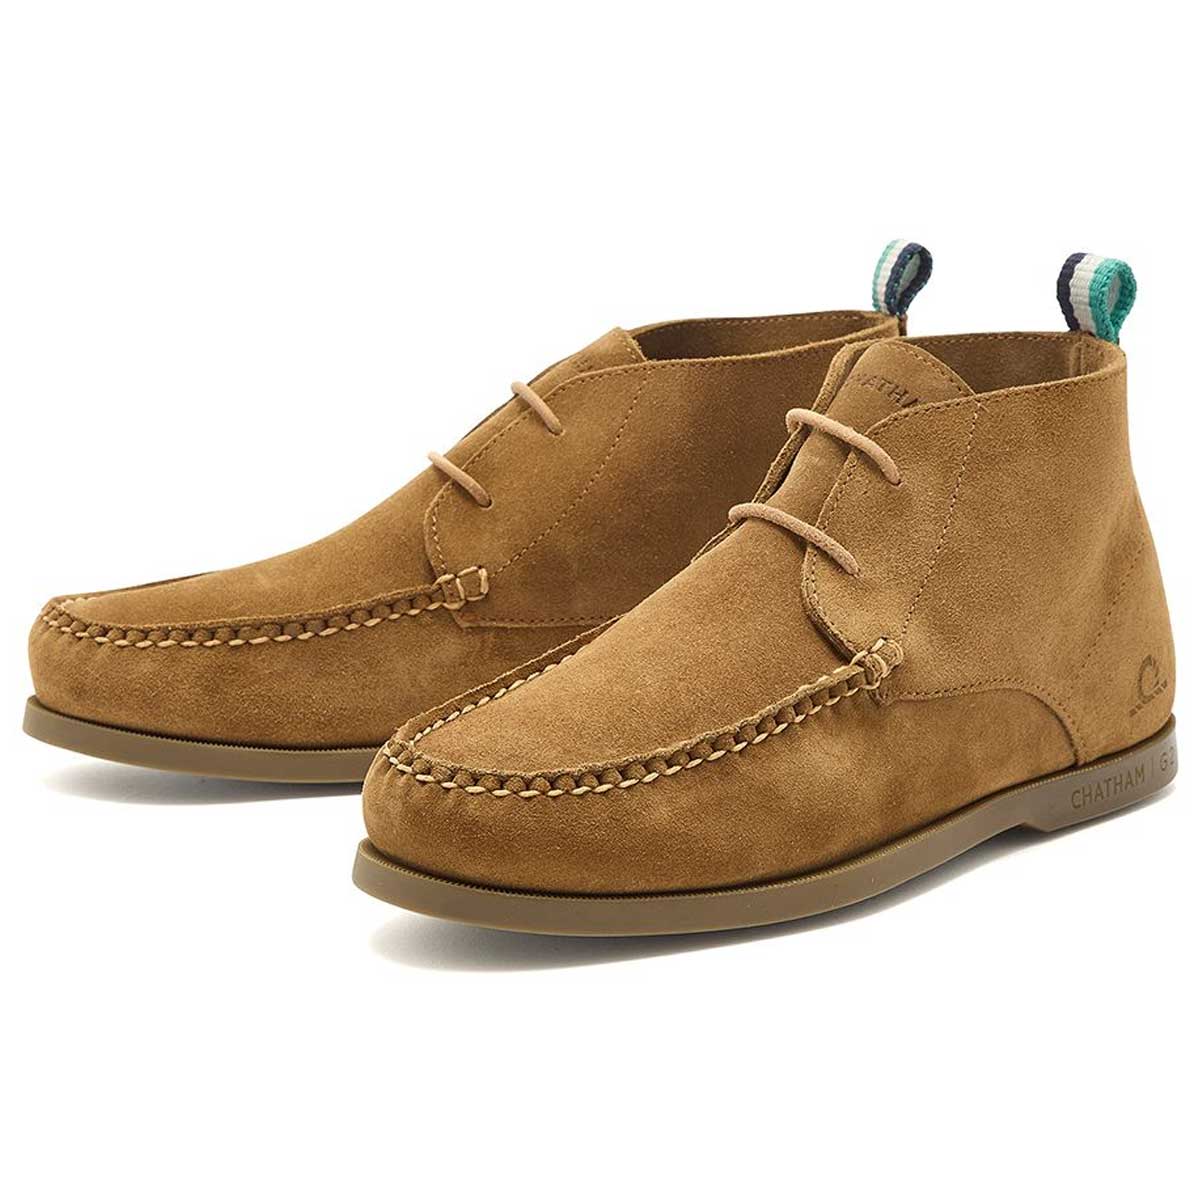 CHATHAM Ives Repello Suede G2 Boat Chukka Boots - Men's - Tan